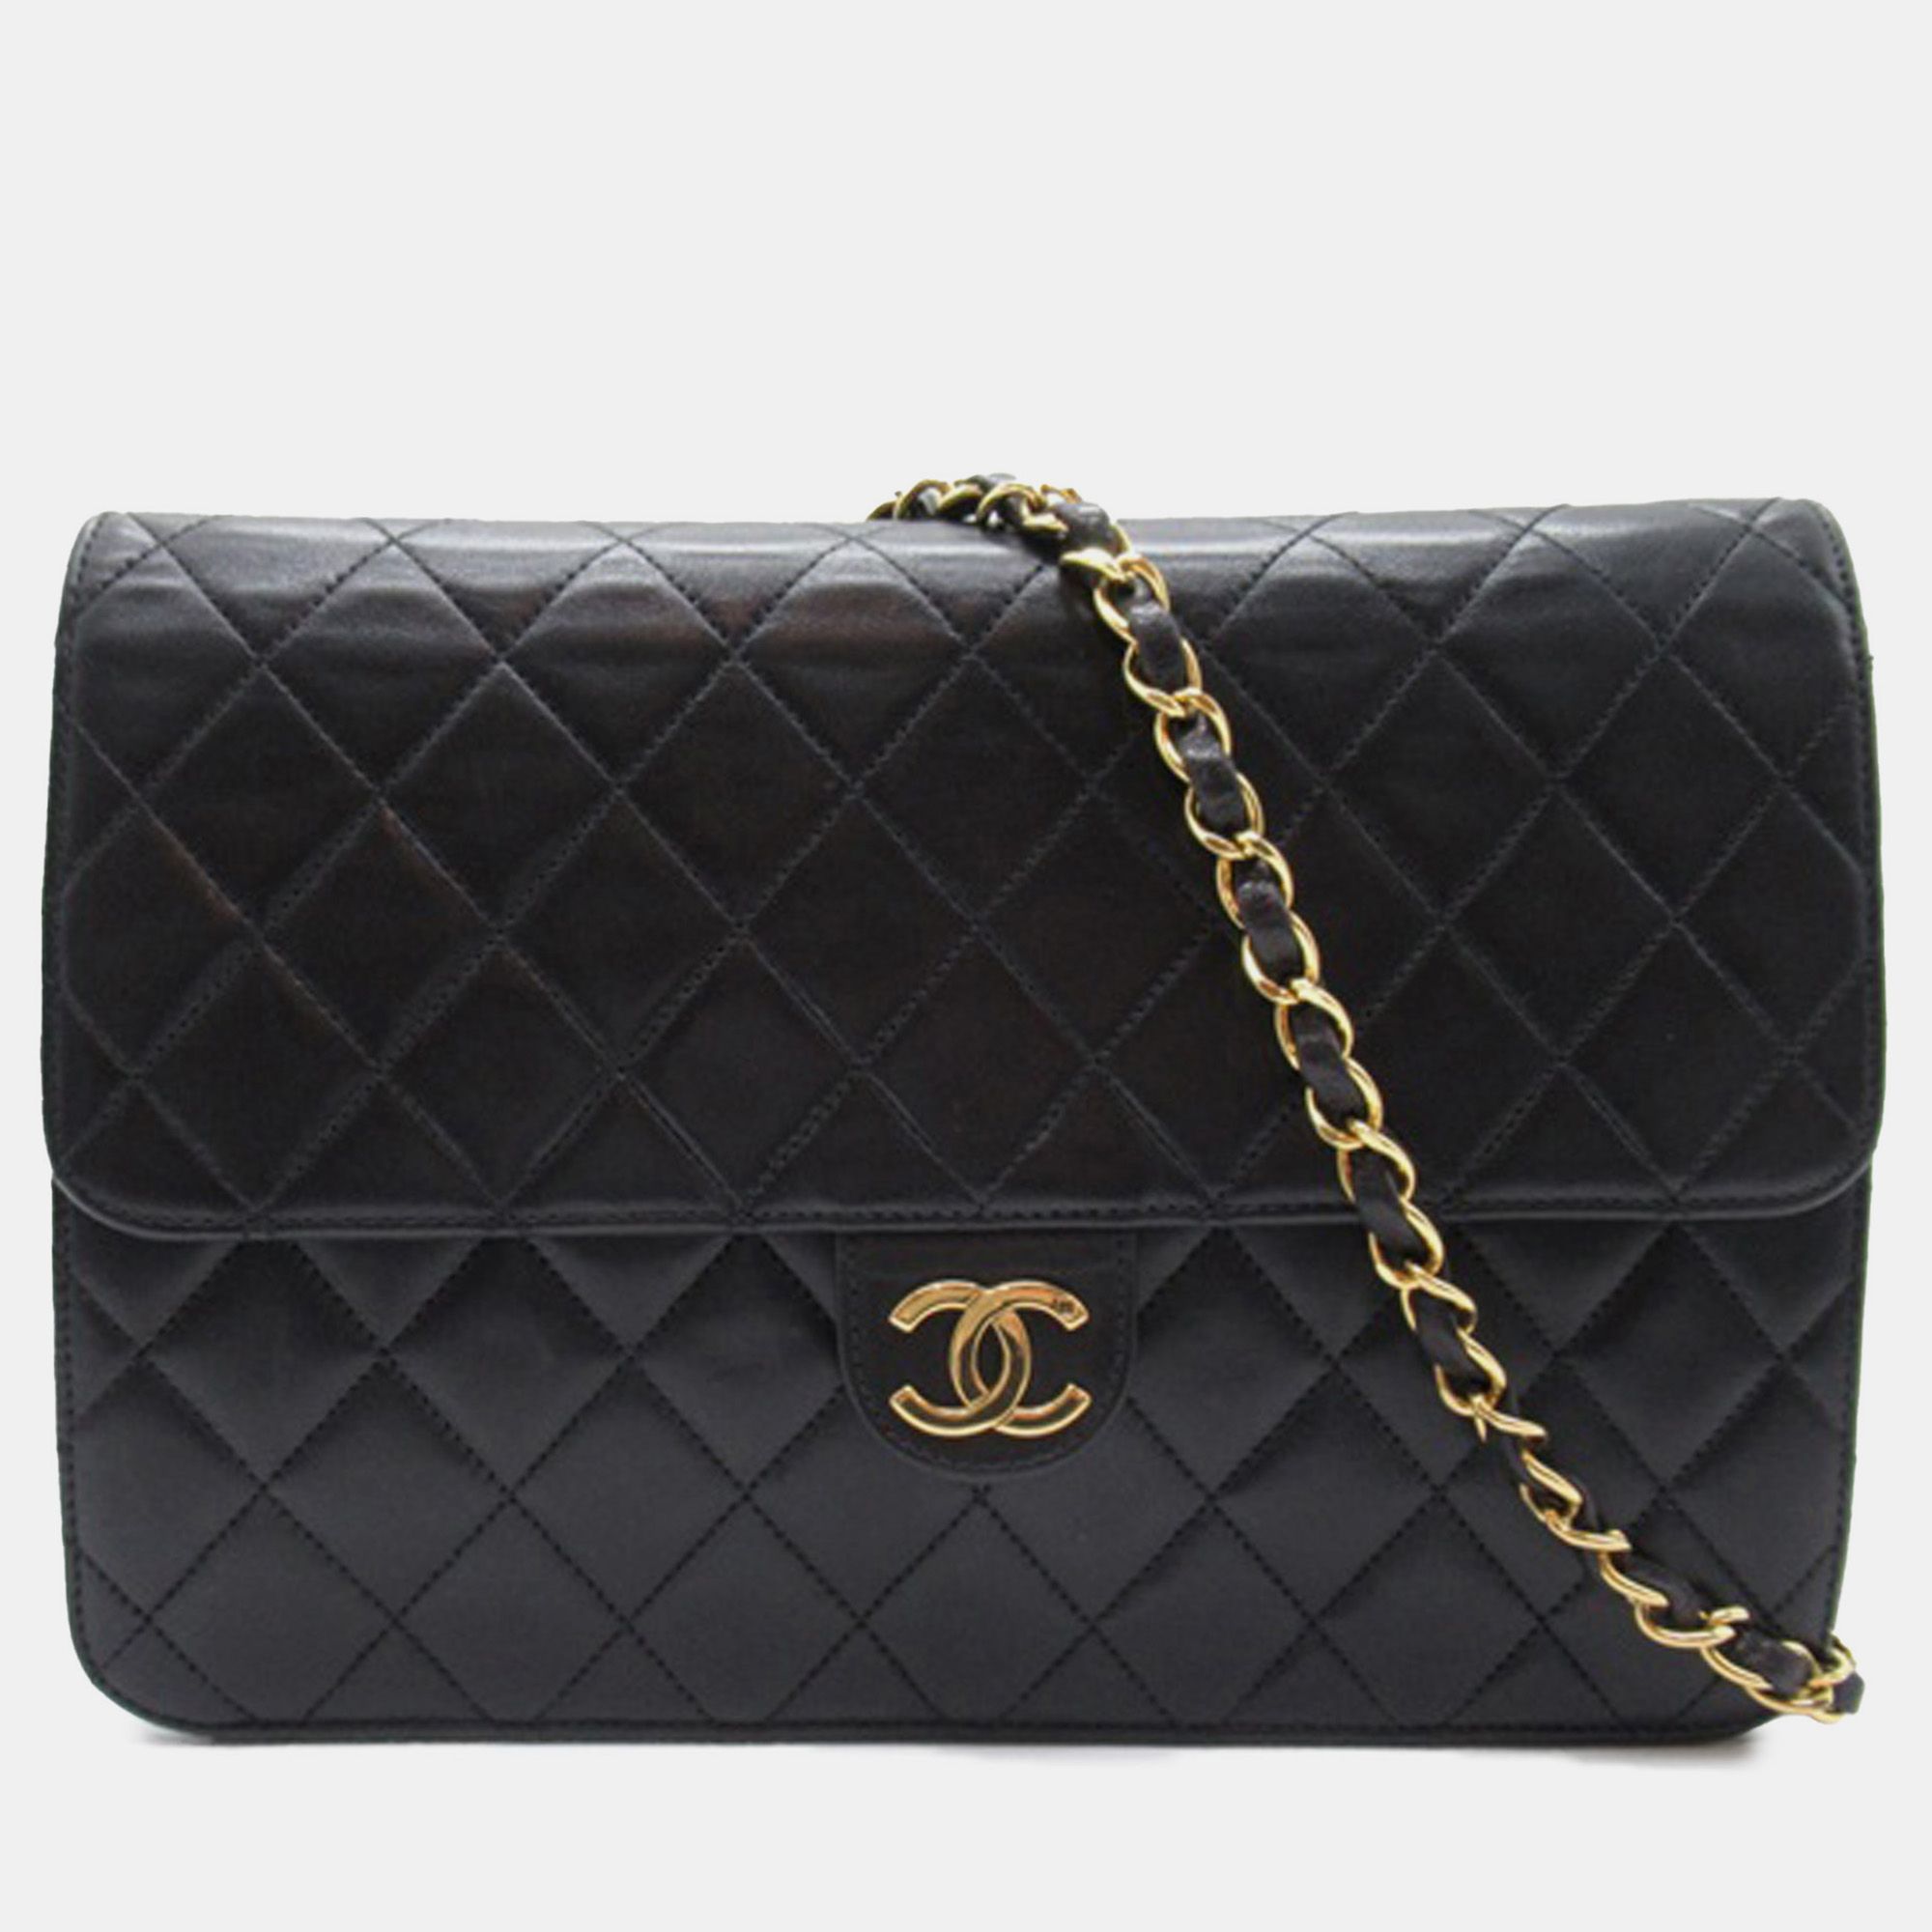 Chanel cc quilted lambskin single flap bag